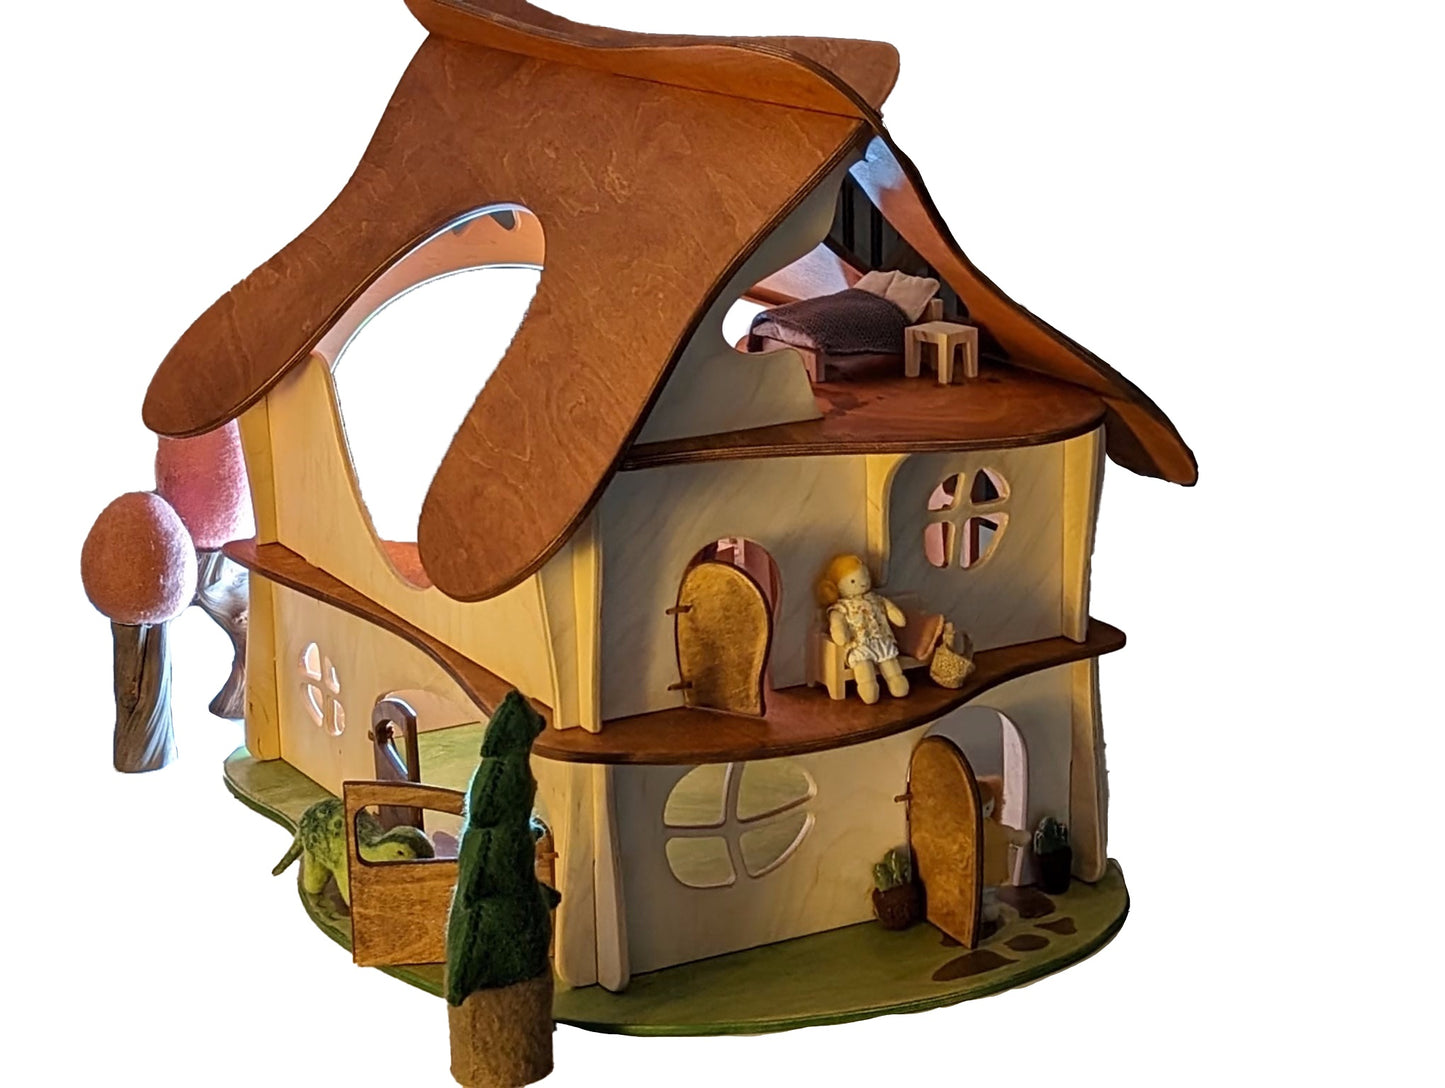 The Enchanting Twig Studio Large Waldorf-Style Wooden Dollhouse - Perfect for Imaginative Play!